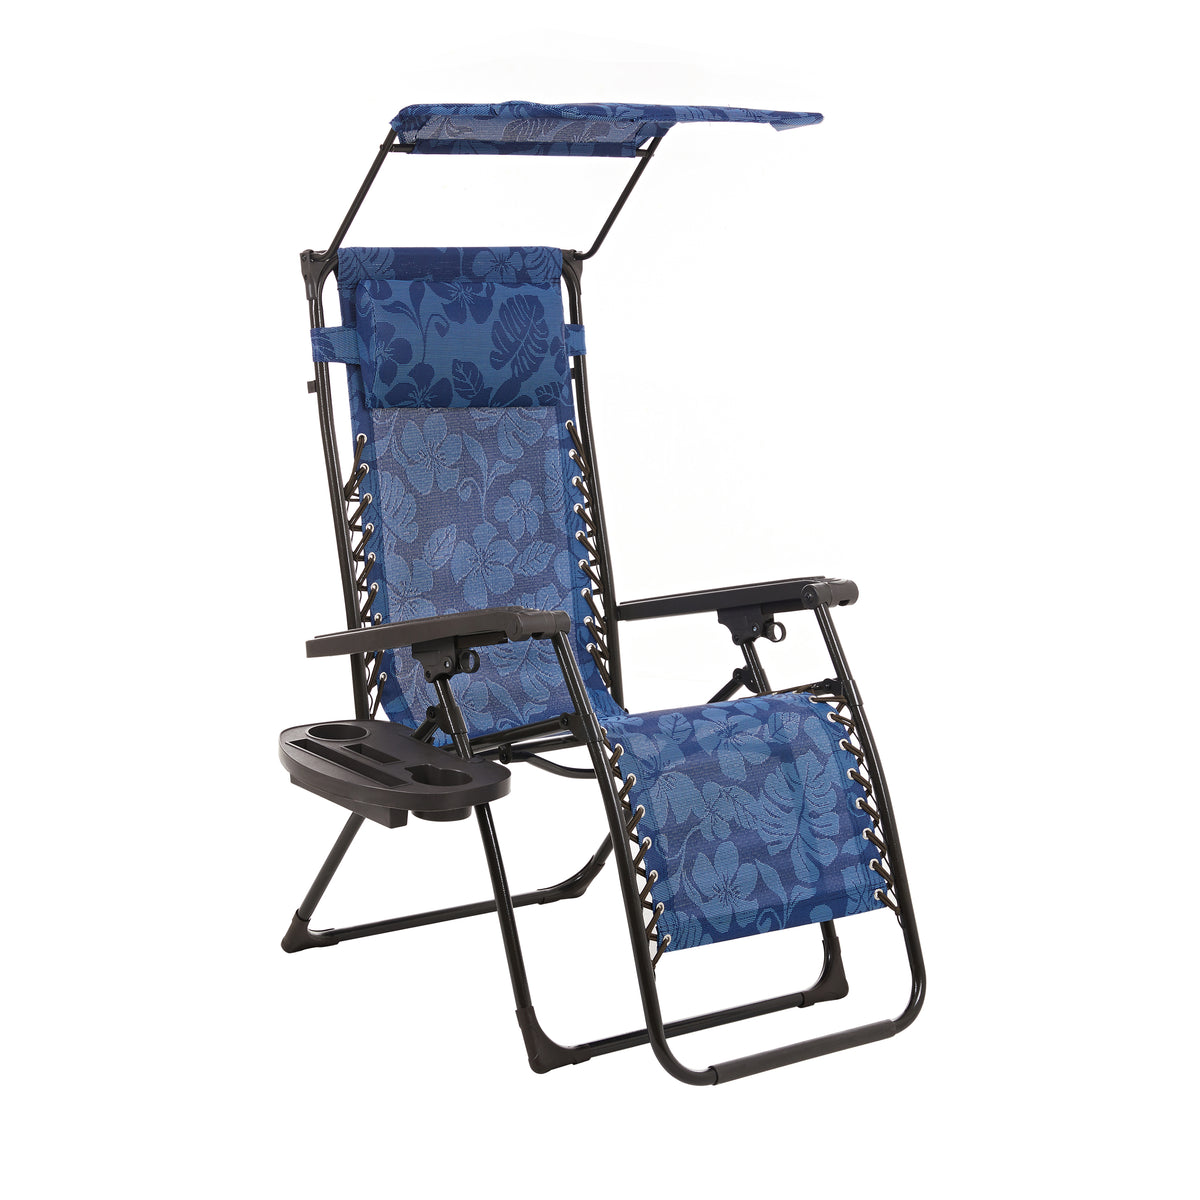 Bliss Hammocks 26-inch Wide Zero Gravity Chair with Adjustable Canopy Sun-Shade, Drink Tray, and Adjustable Pillow in the blue flowers variation.